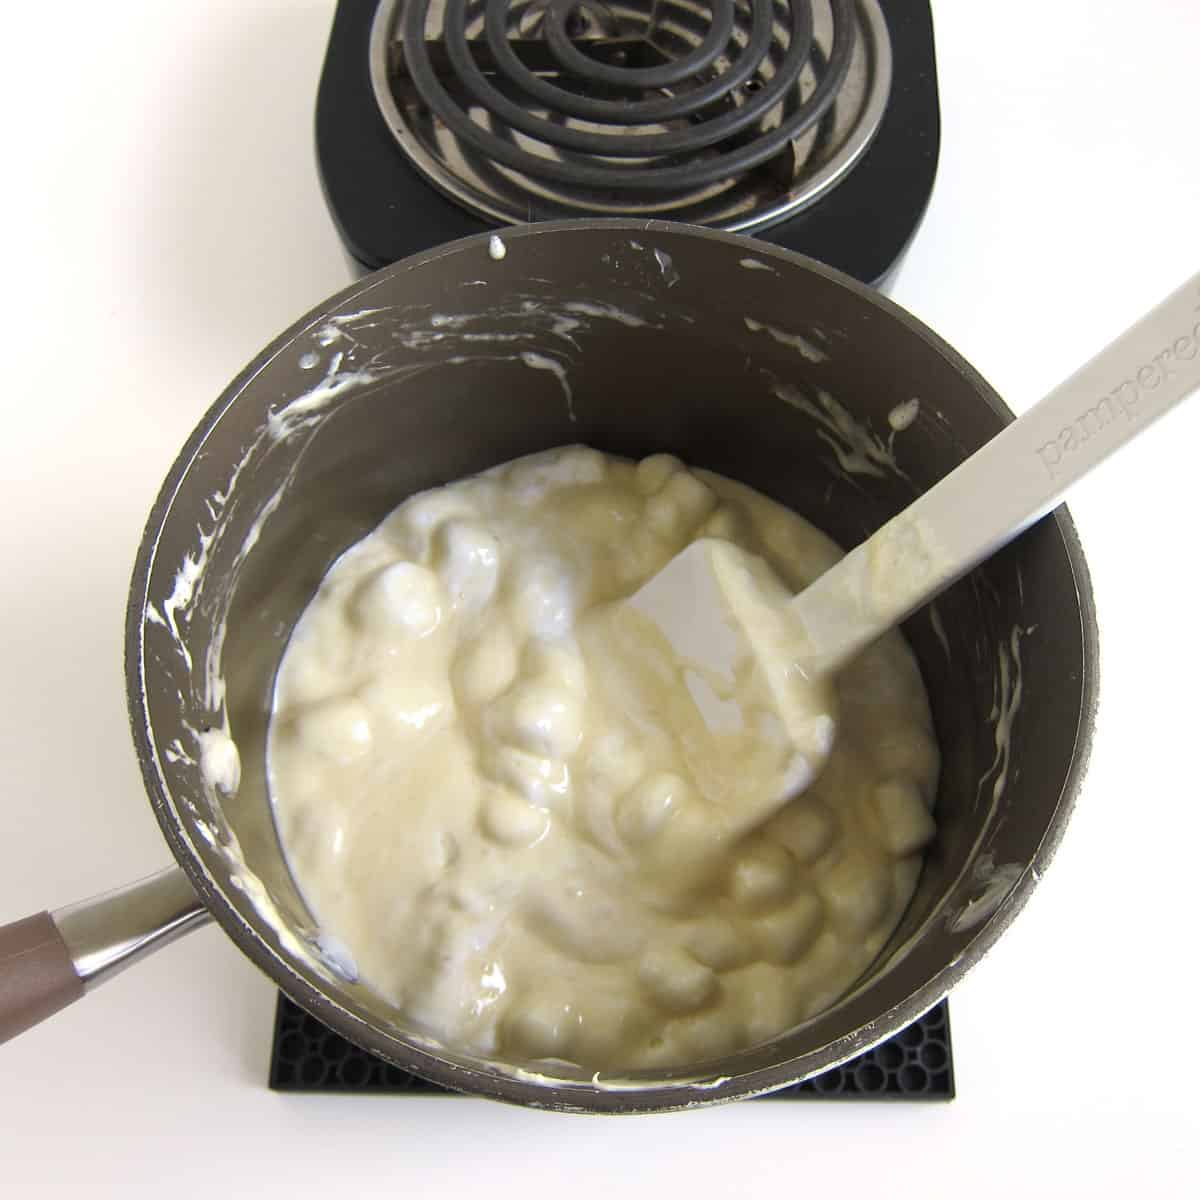 saucepan with partially melted butter, marshmallows, and white chocolate off the stove on a silicone mat.